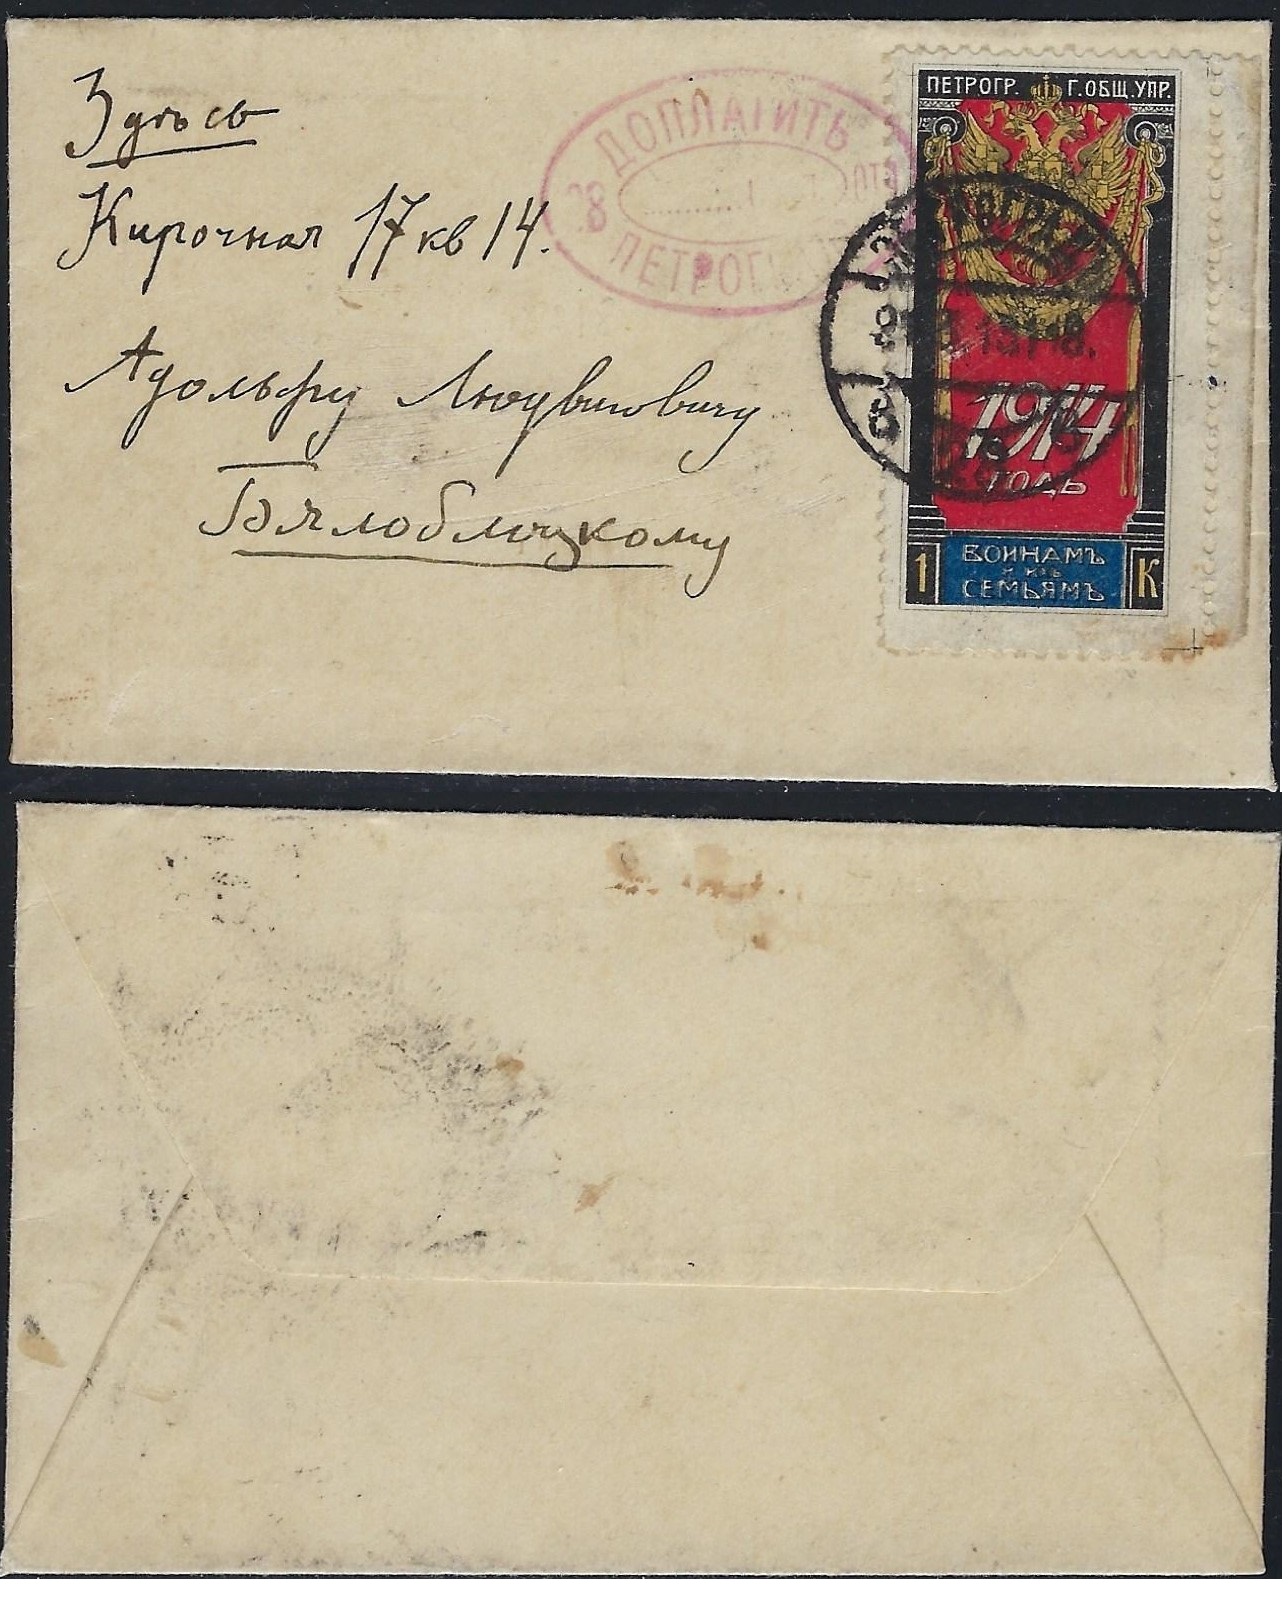 Russia Postal History - Postmarks Postage due Scott 05a1915 